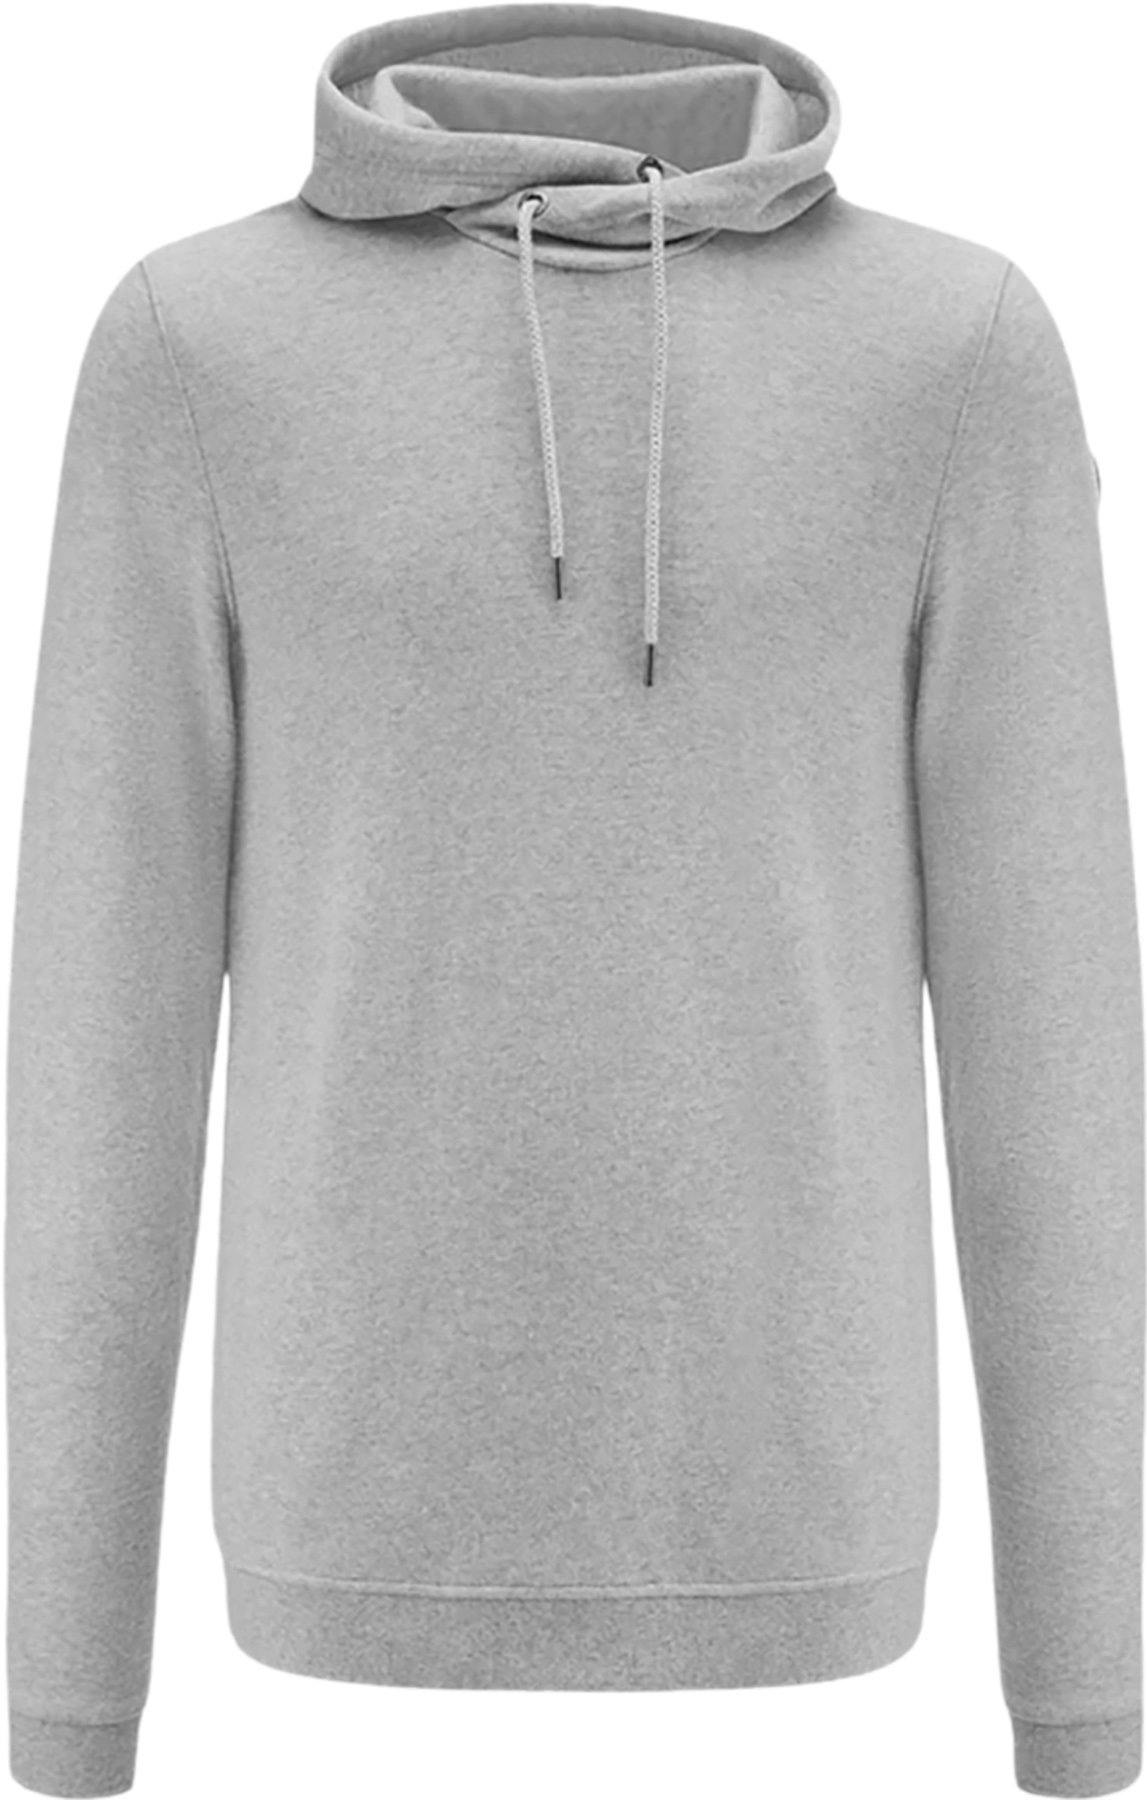 Product image for Tind Hoodie - Men's